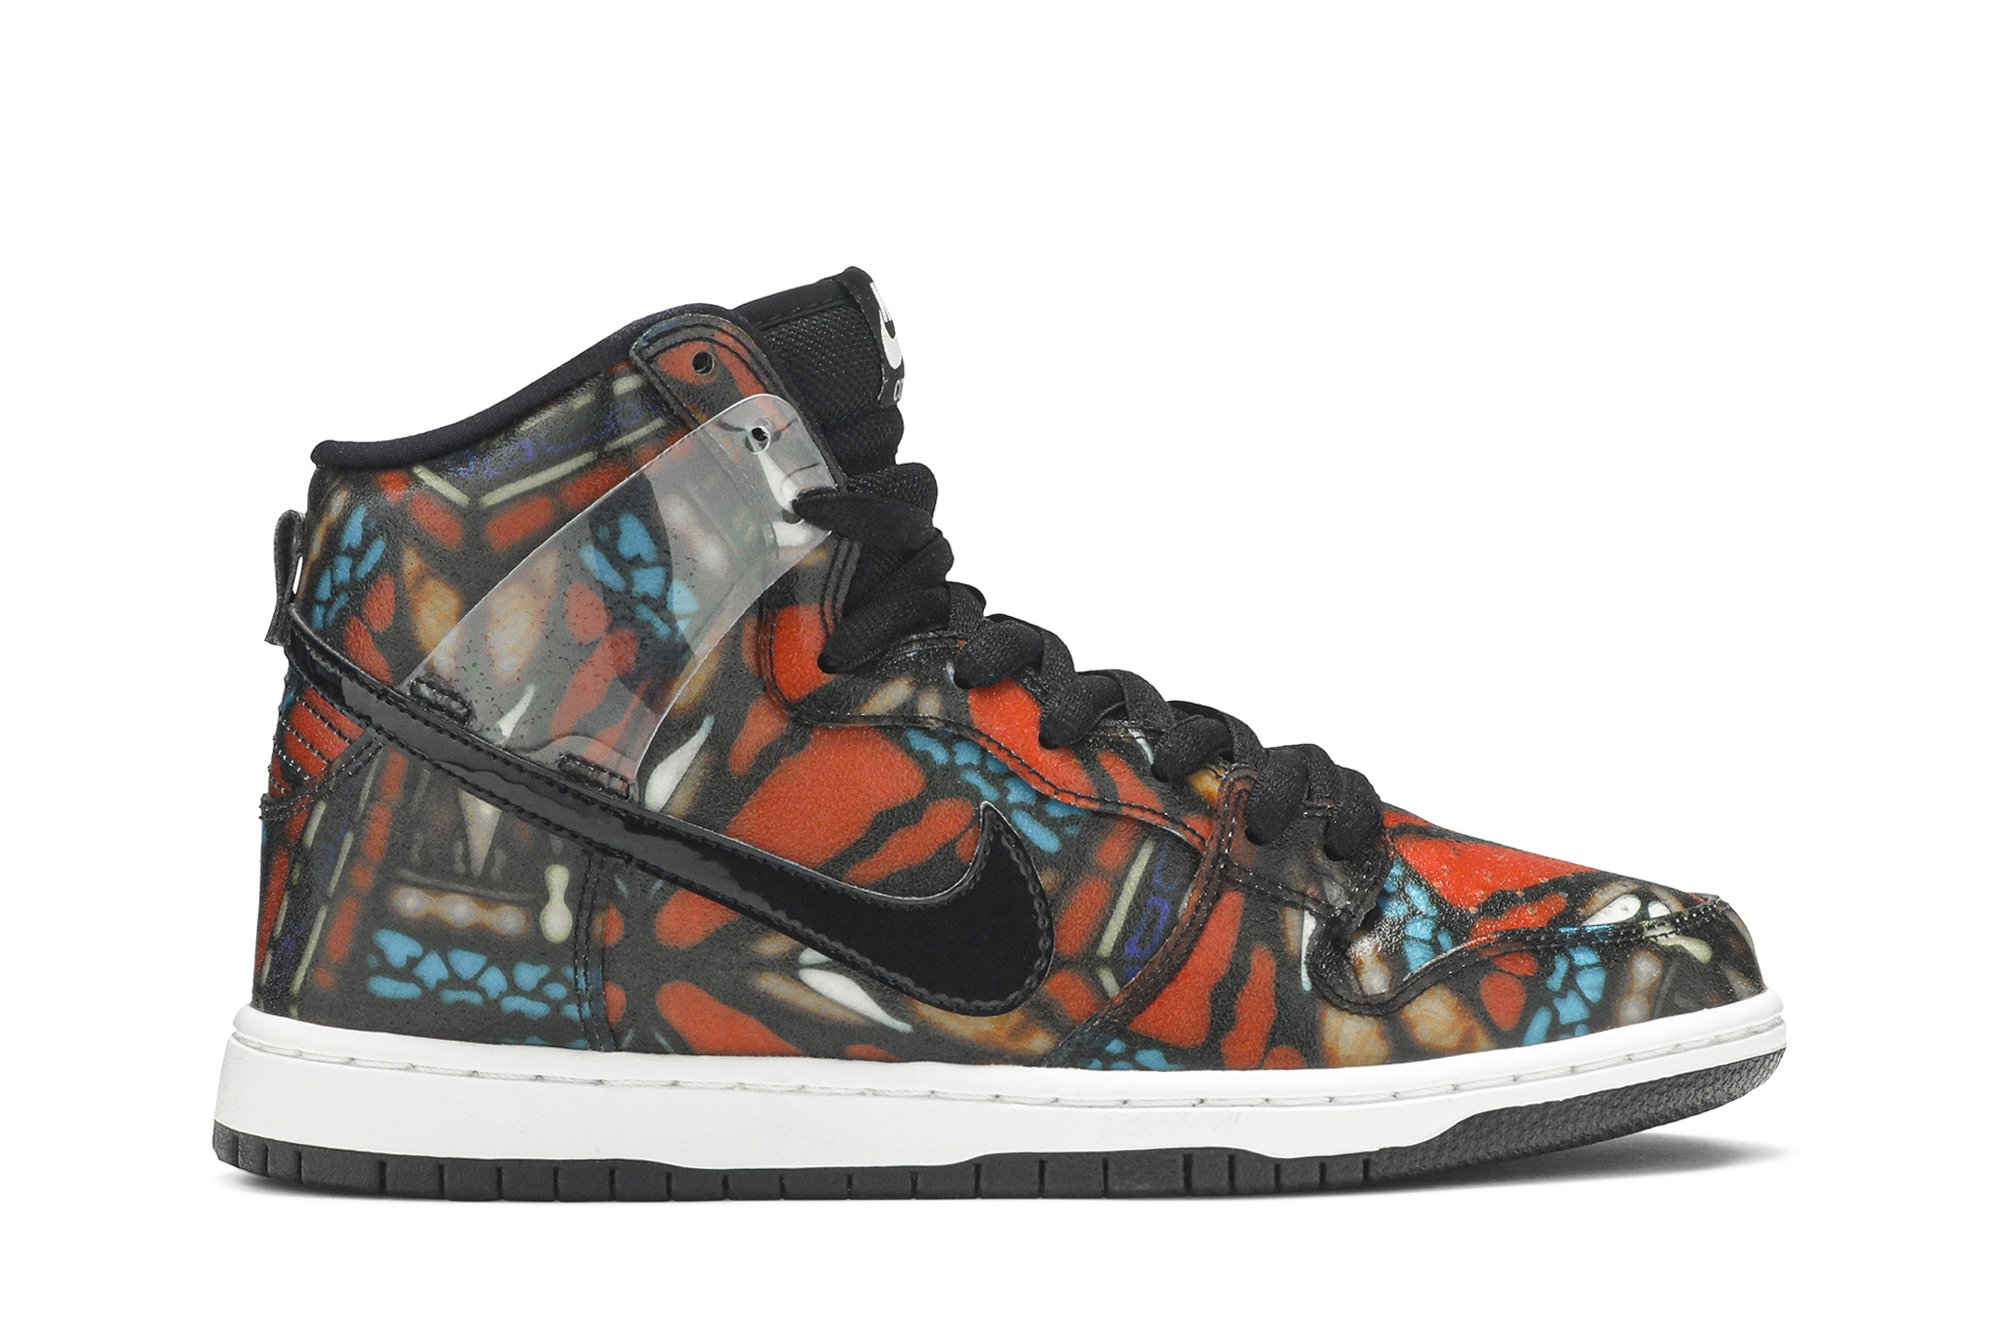 Buy Concepts x SB Dunk High 'Stained Glass' - 313171 606 | GOAT